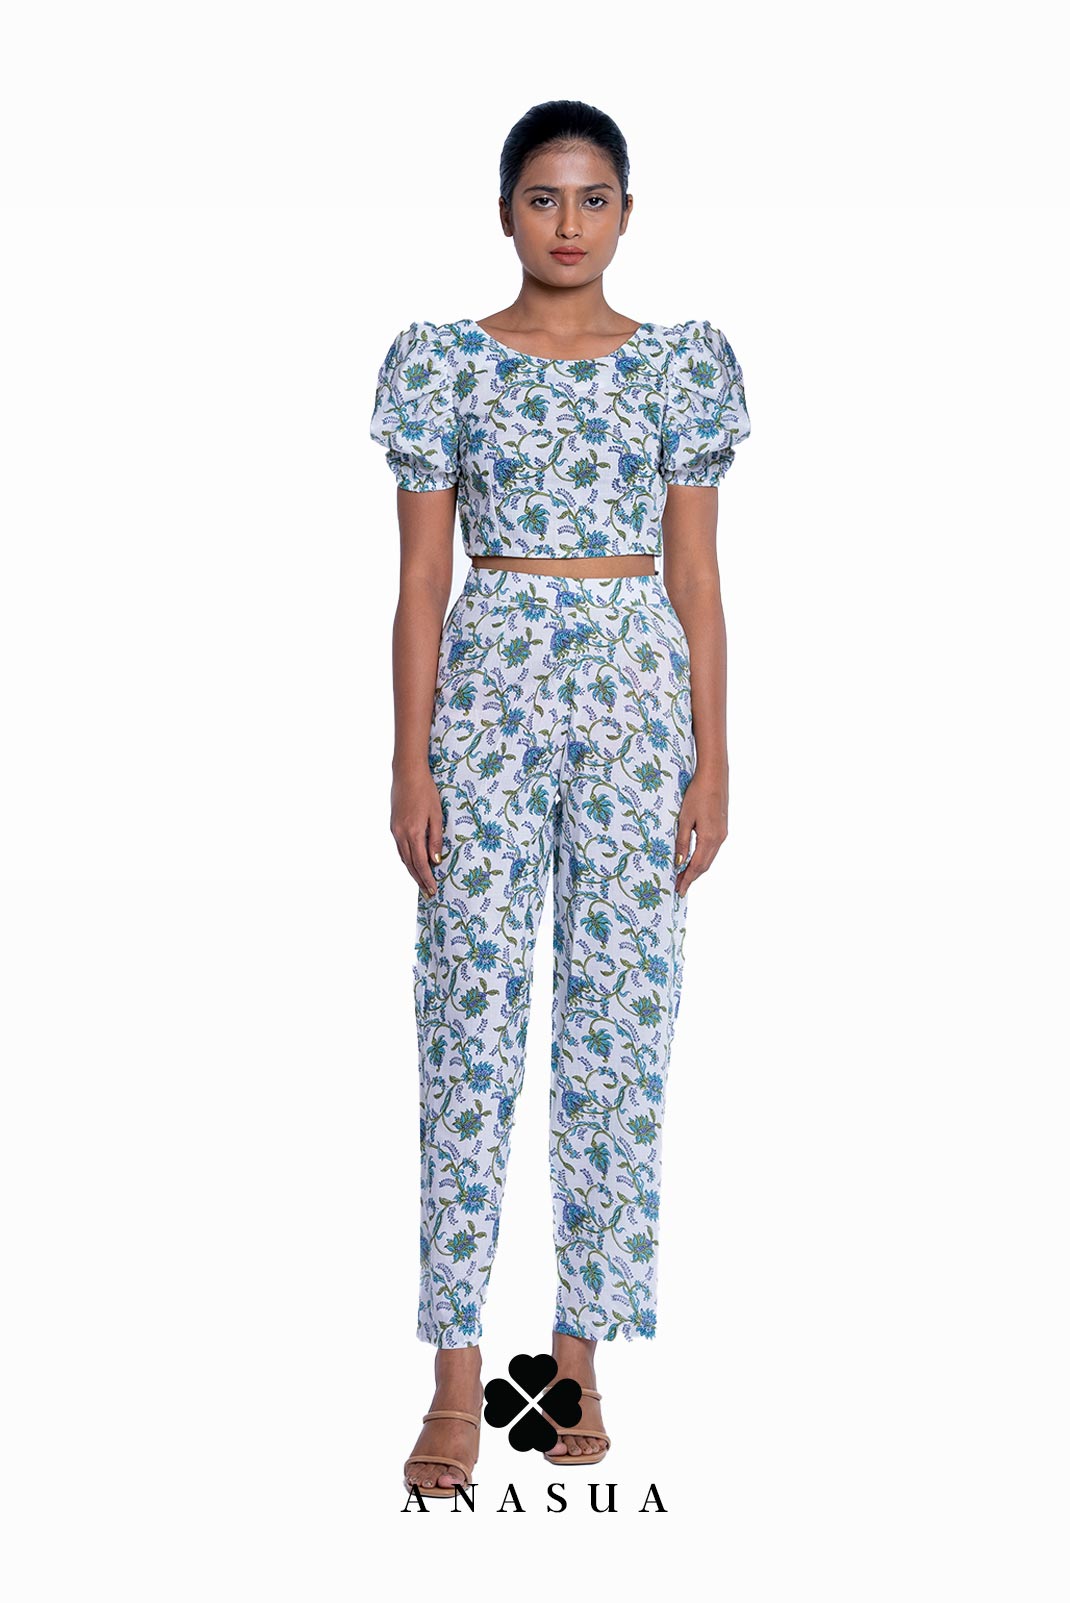 Blue Floral Printed Women Co-Ord Set